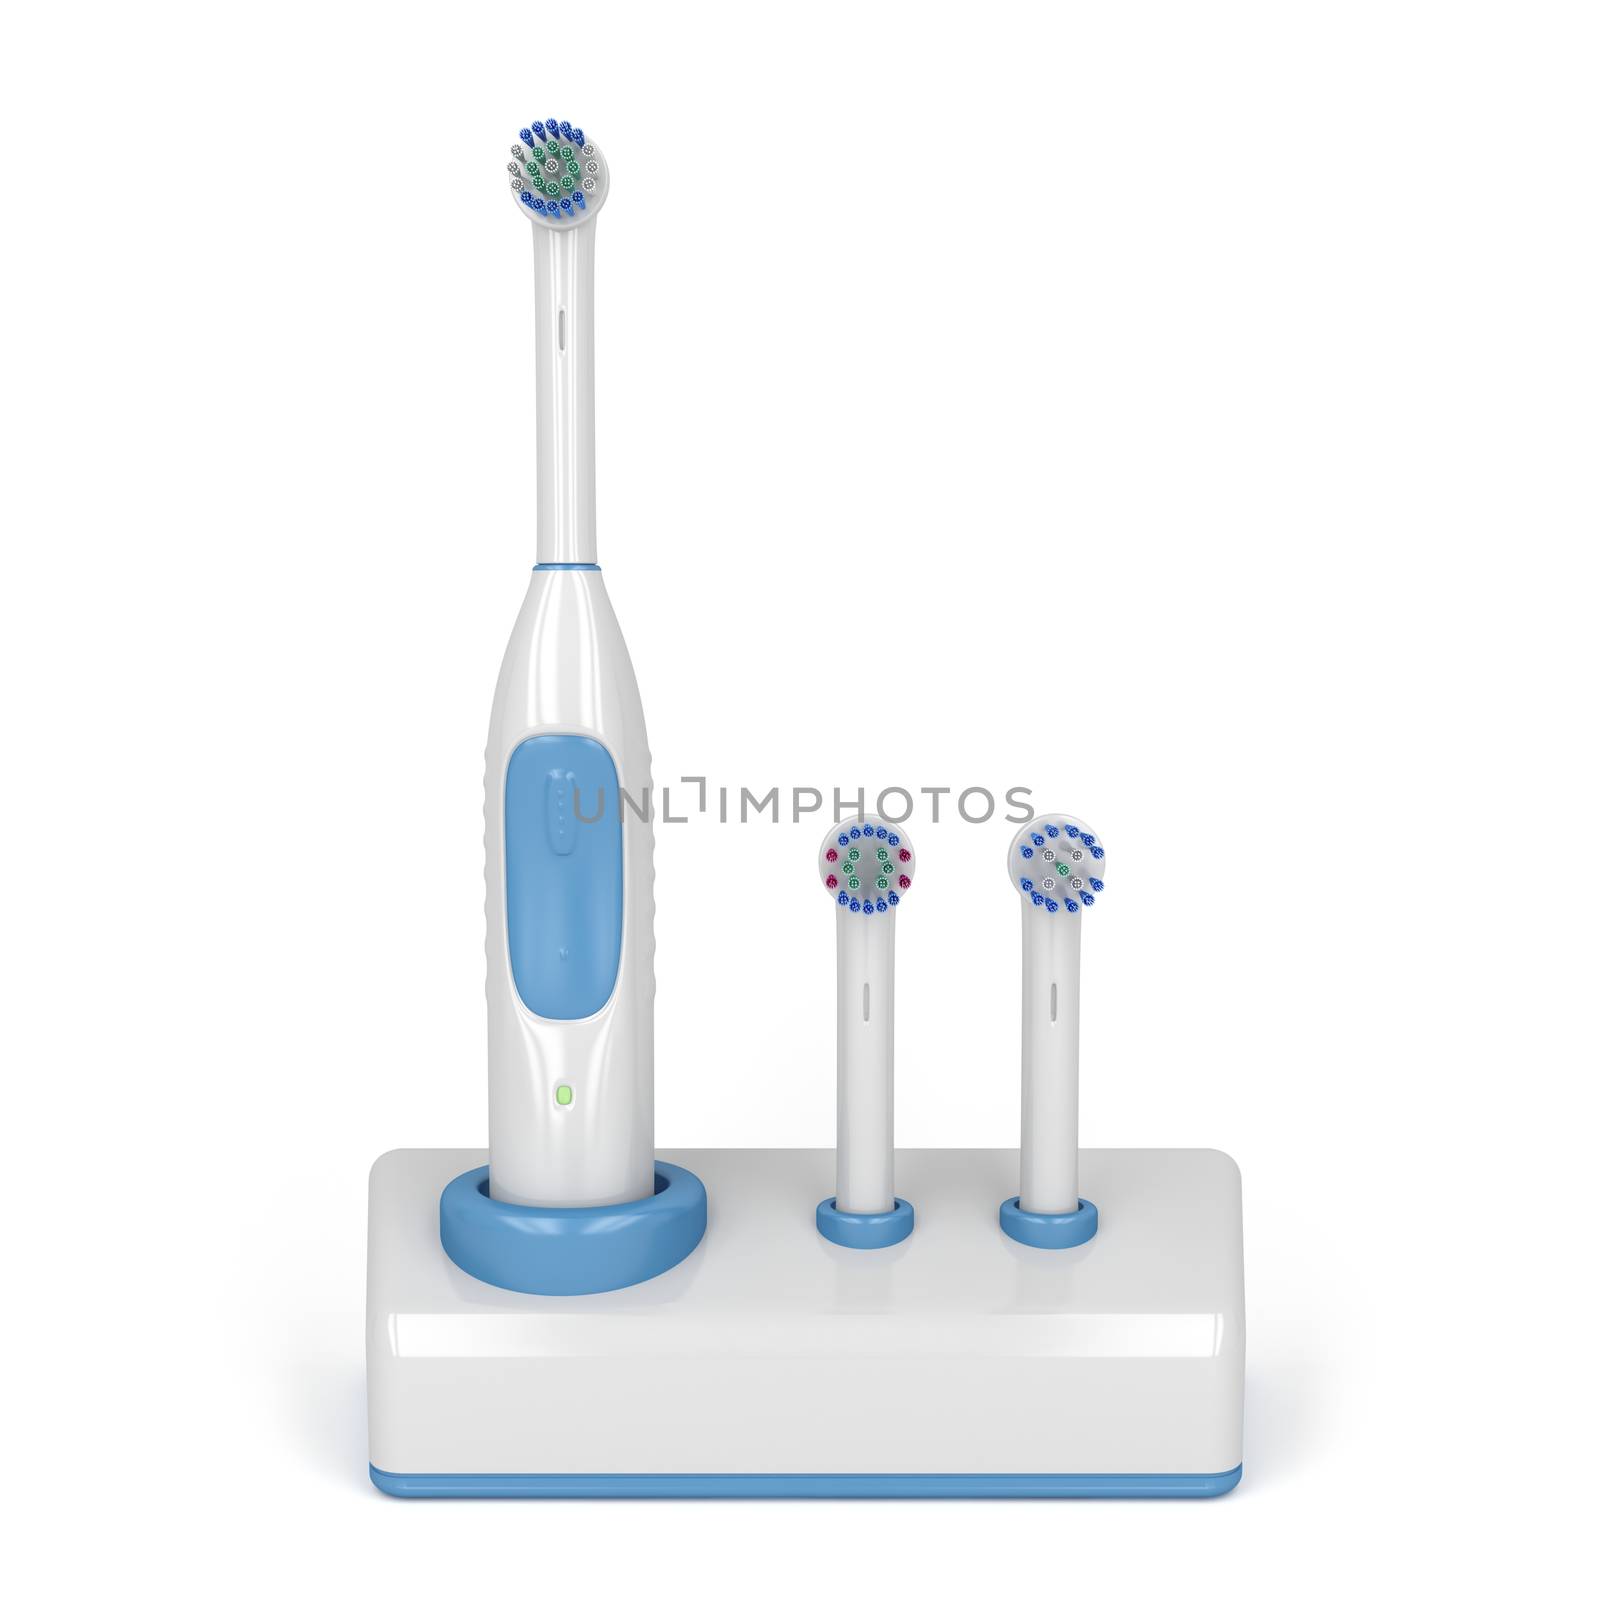 Electric toothbrush on stand by magraphics